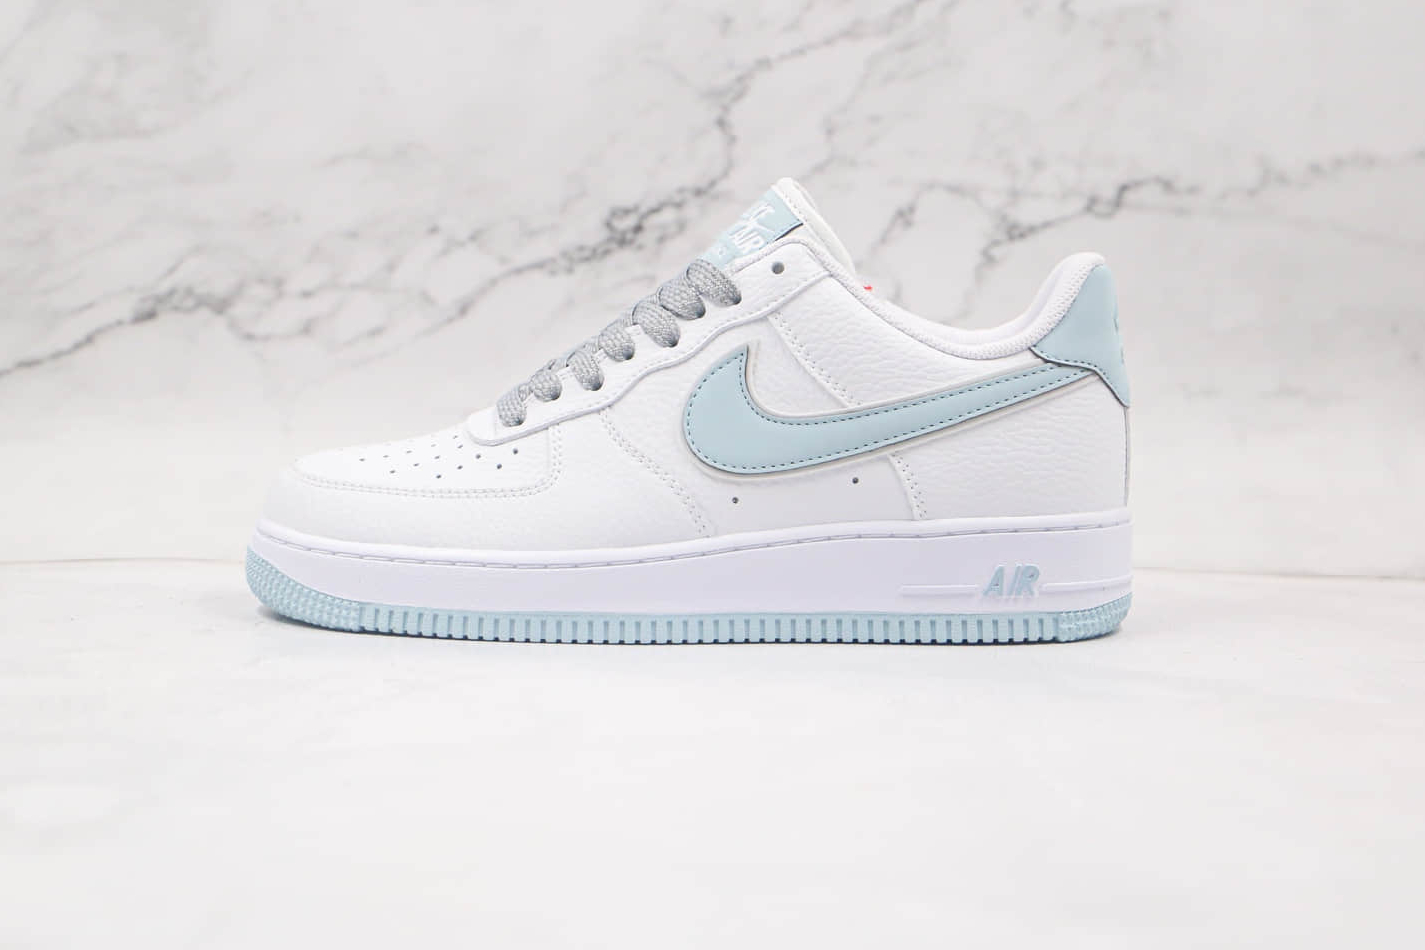 Nike Air Force 1 07 SU19 Low White Ice Blue AQ2566-201 - Stylish and Cool Sneakers